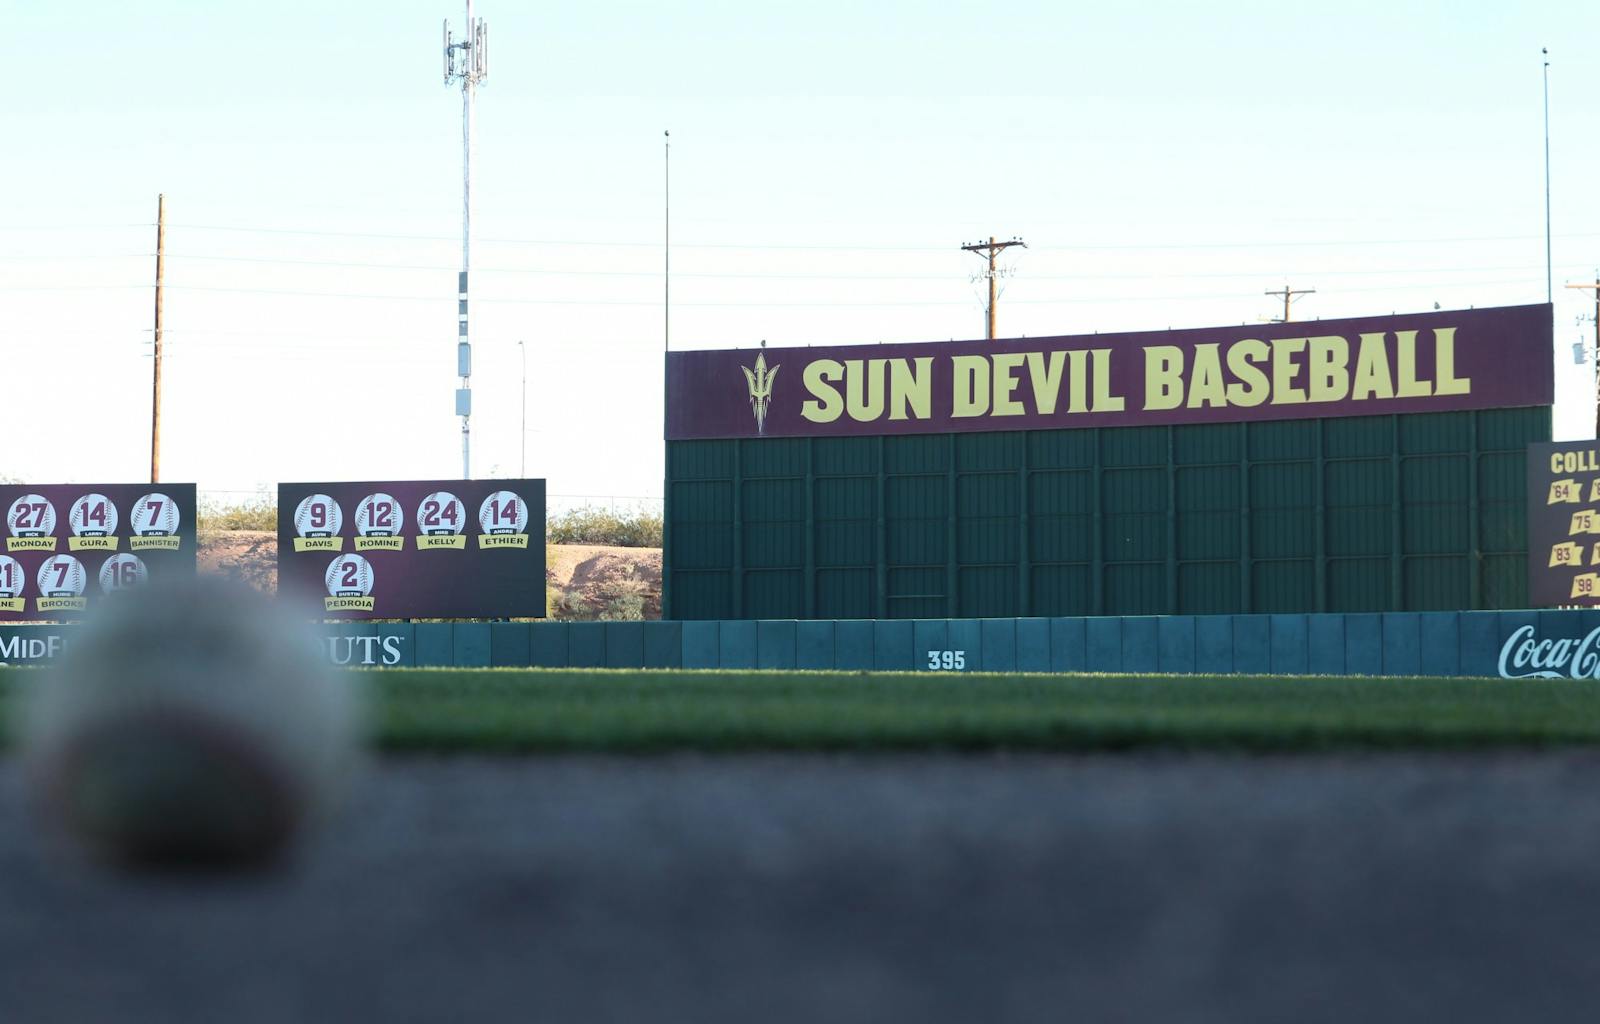 Willie Bloomquist looks to bring ASU baseball back to national prominence